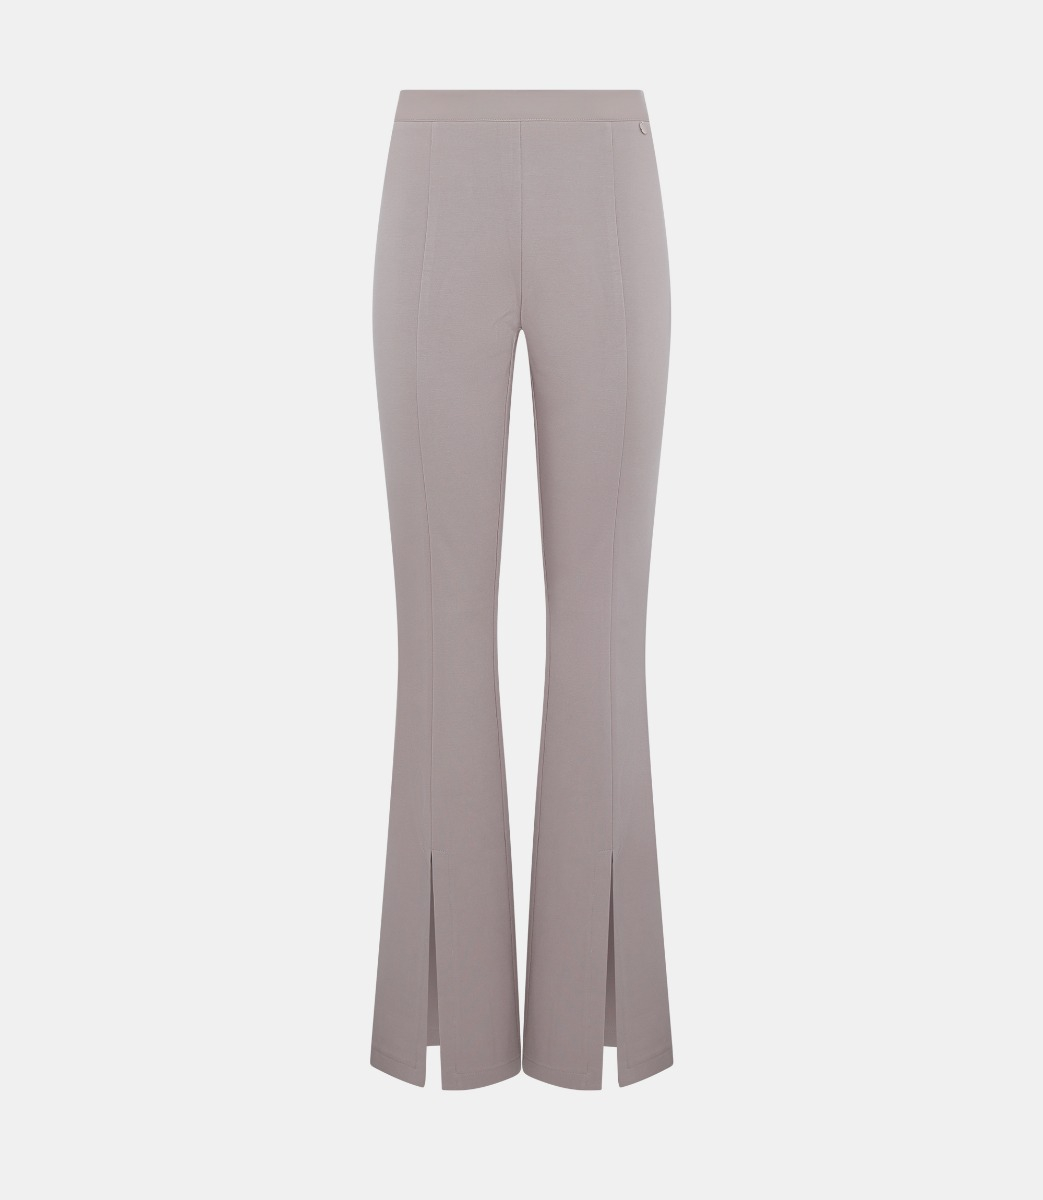 Flared trousers with front slit - CLOTHING - NaraMilano